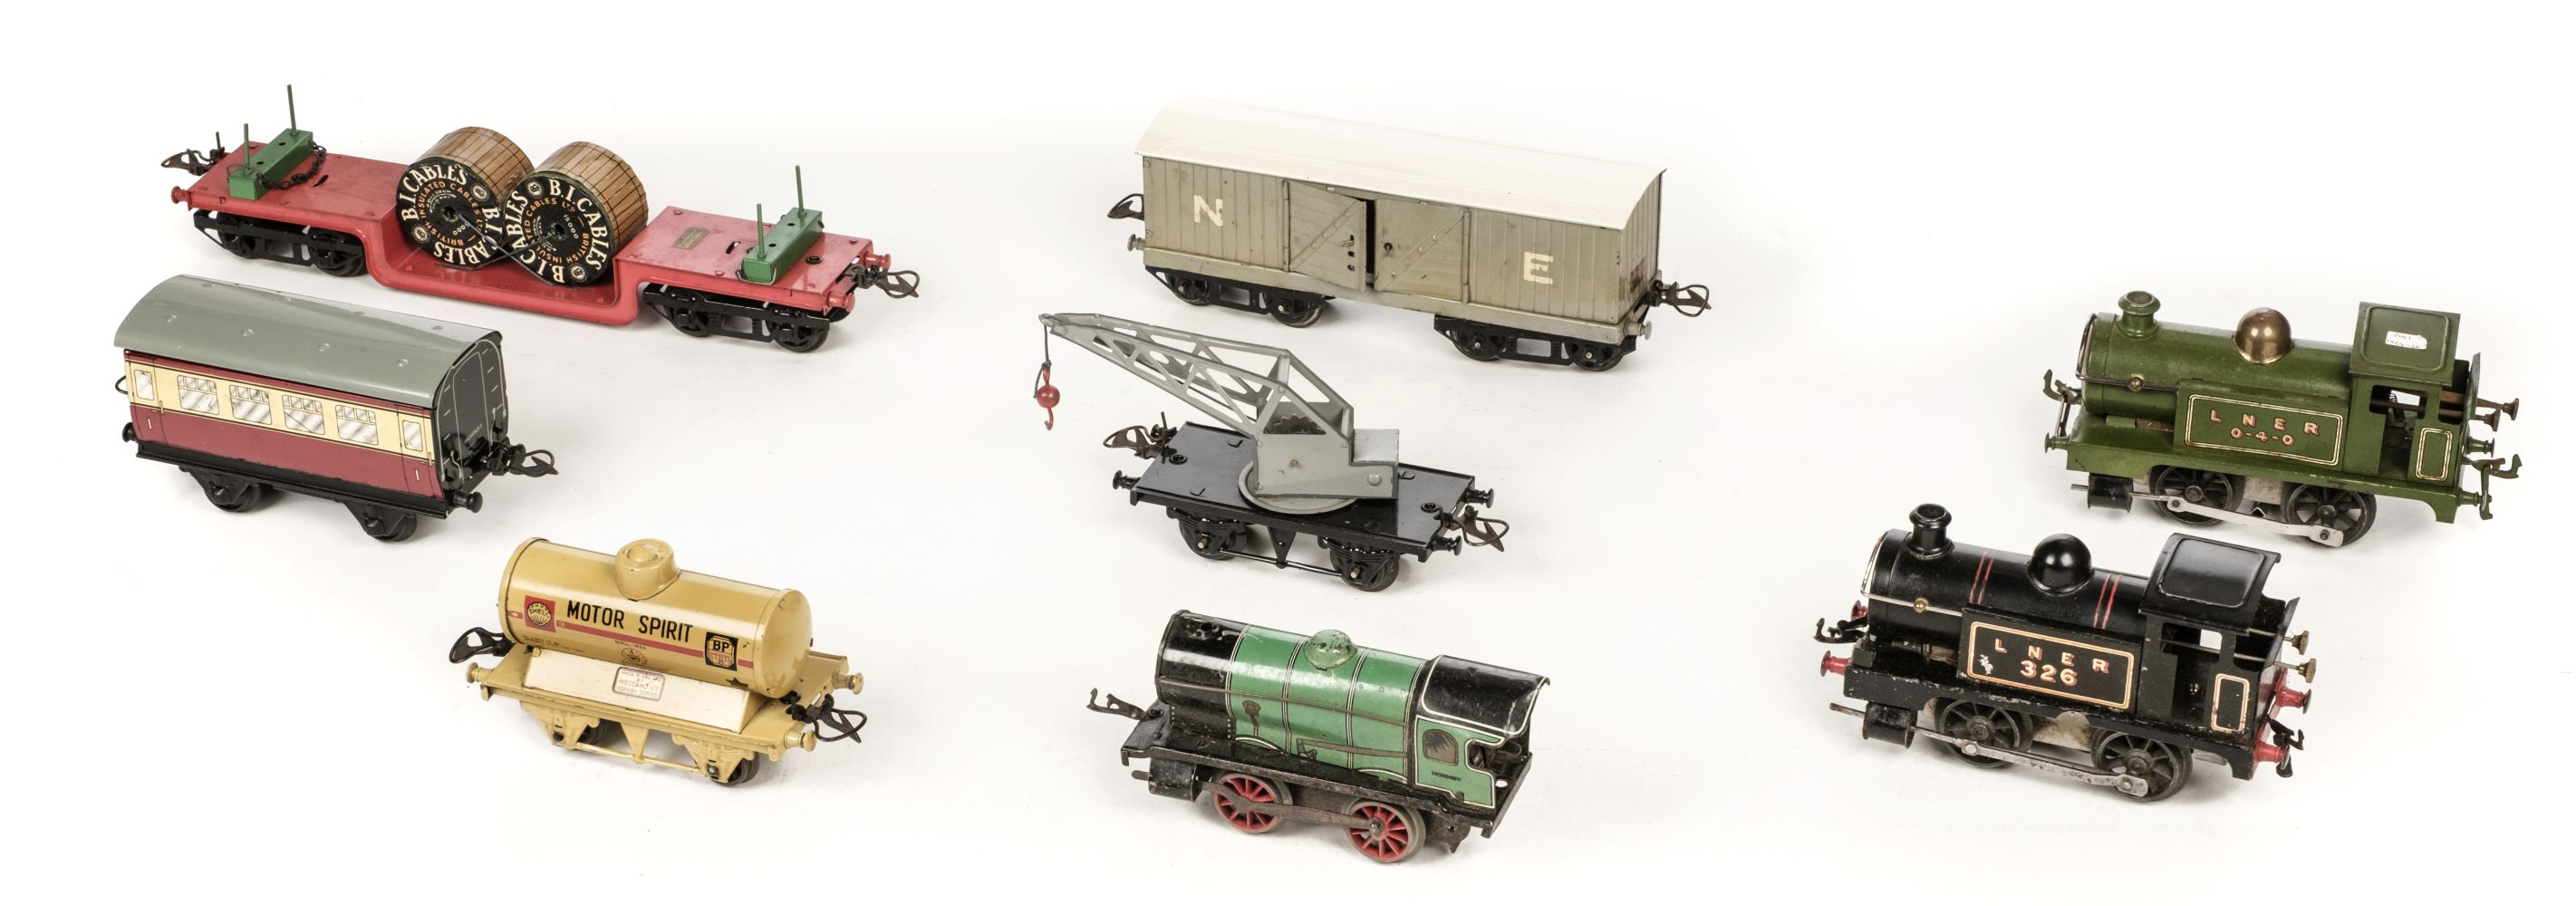 Model Rail. A collection of Hornby Series 0 gauge model rail